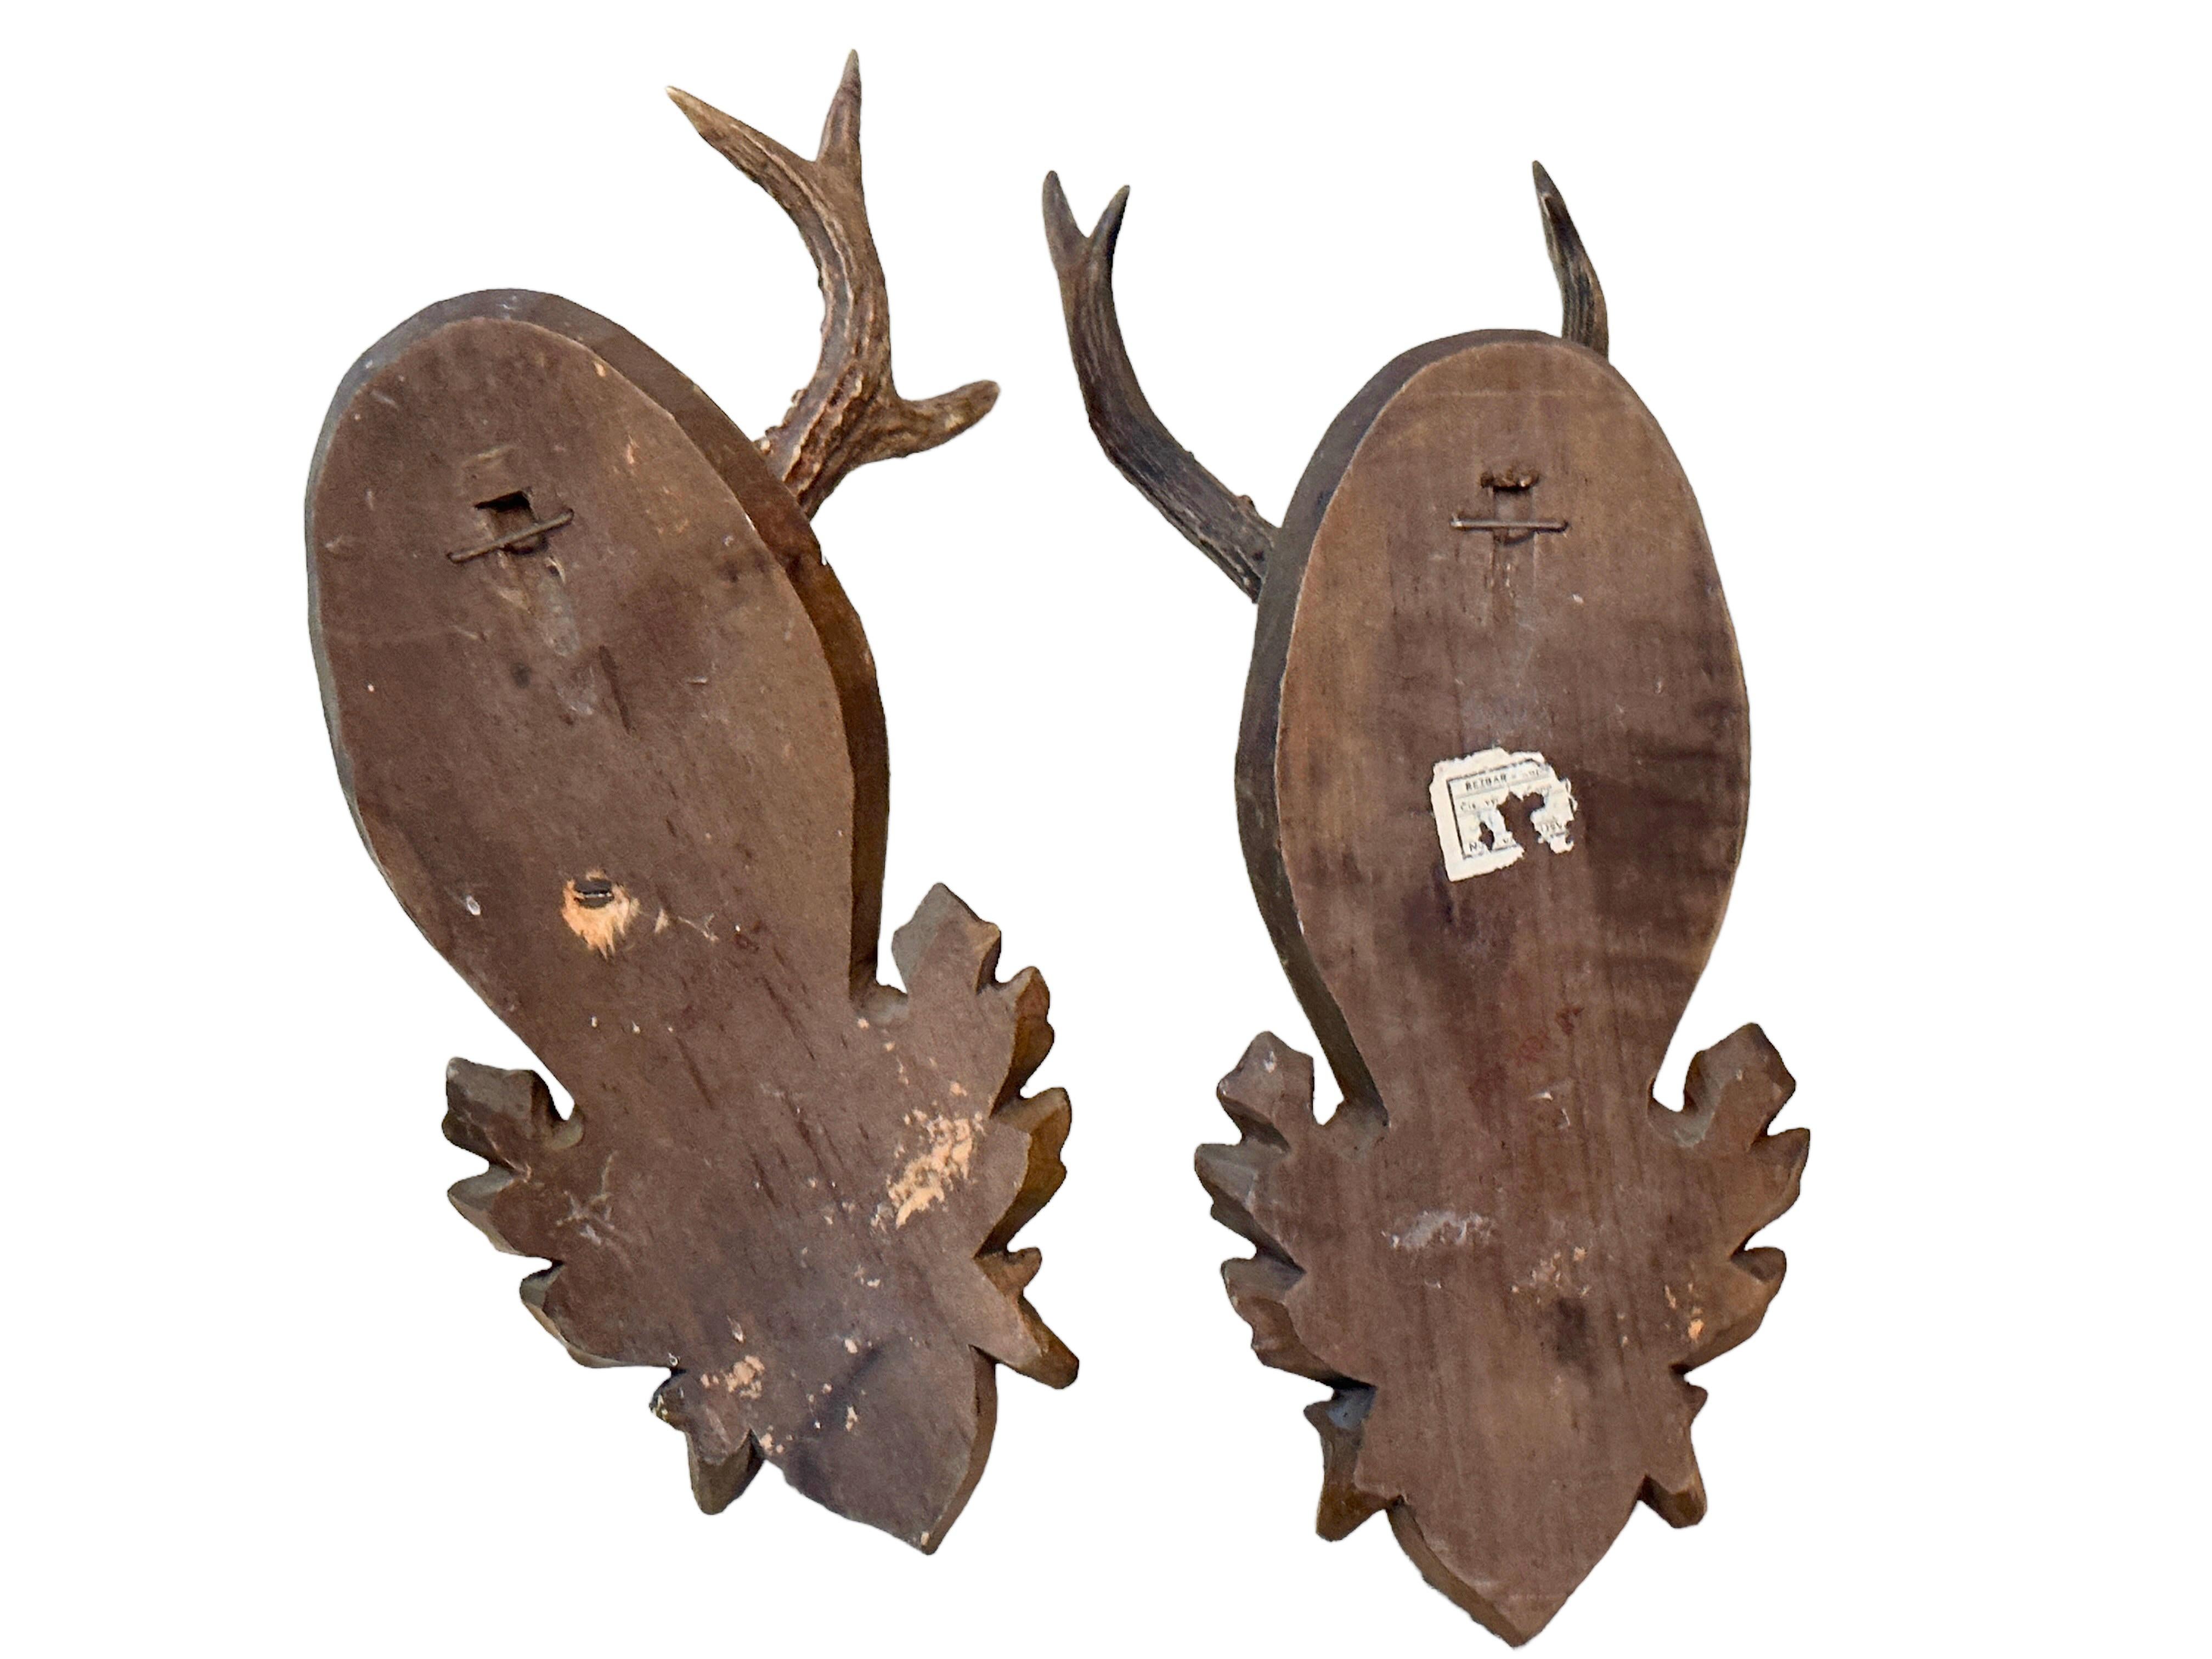 20th Century Two Deer Antler Mount Trophy on Black Forest Carved Wood Plaque from Austria